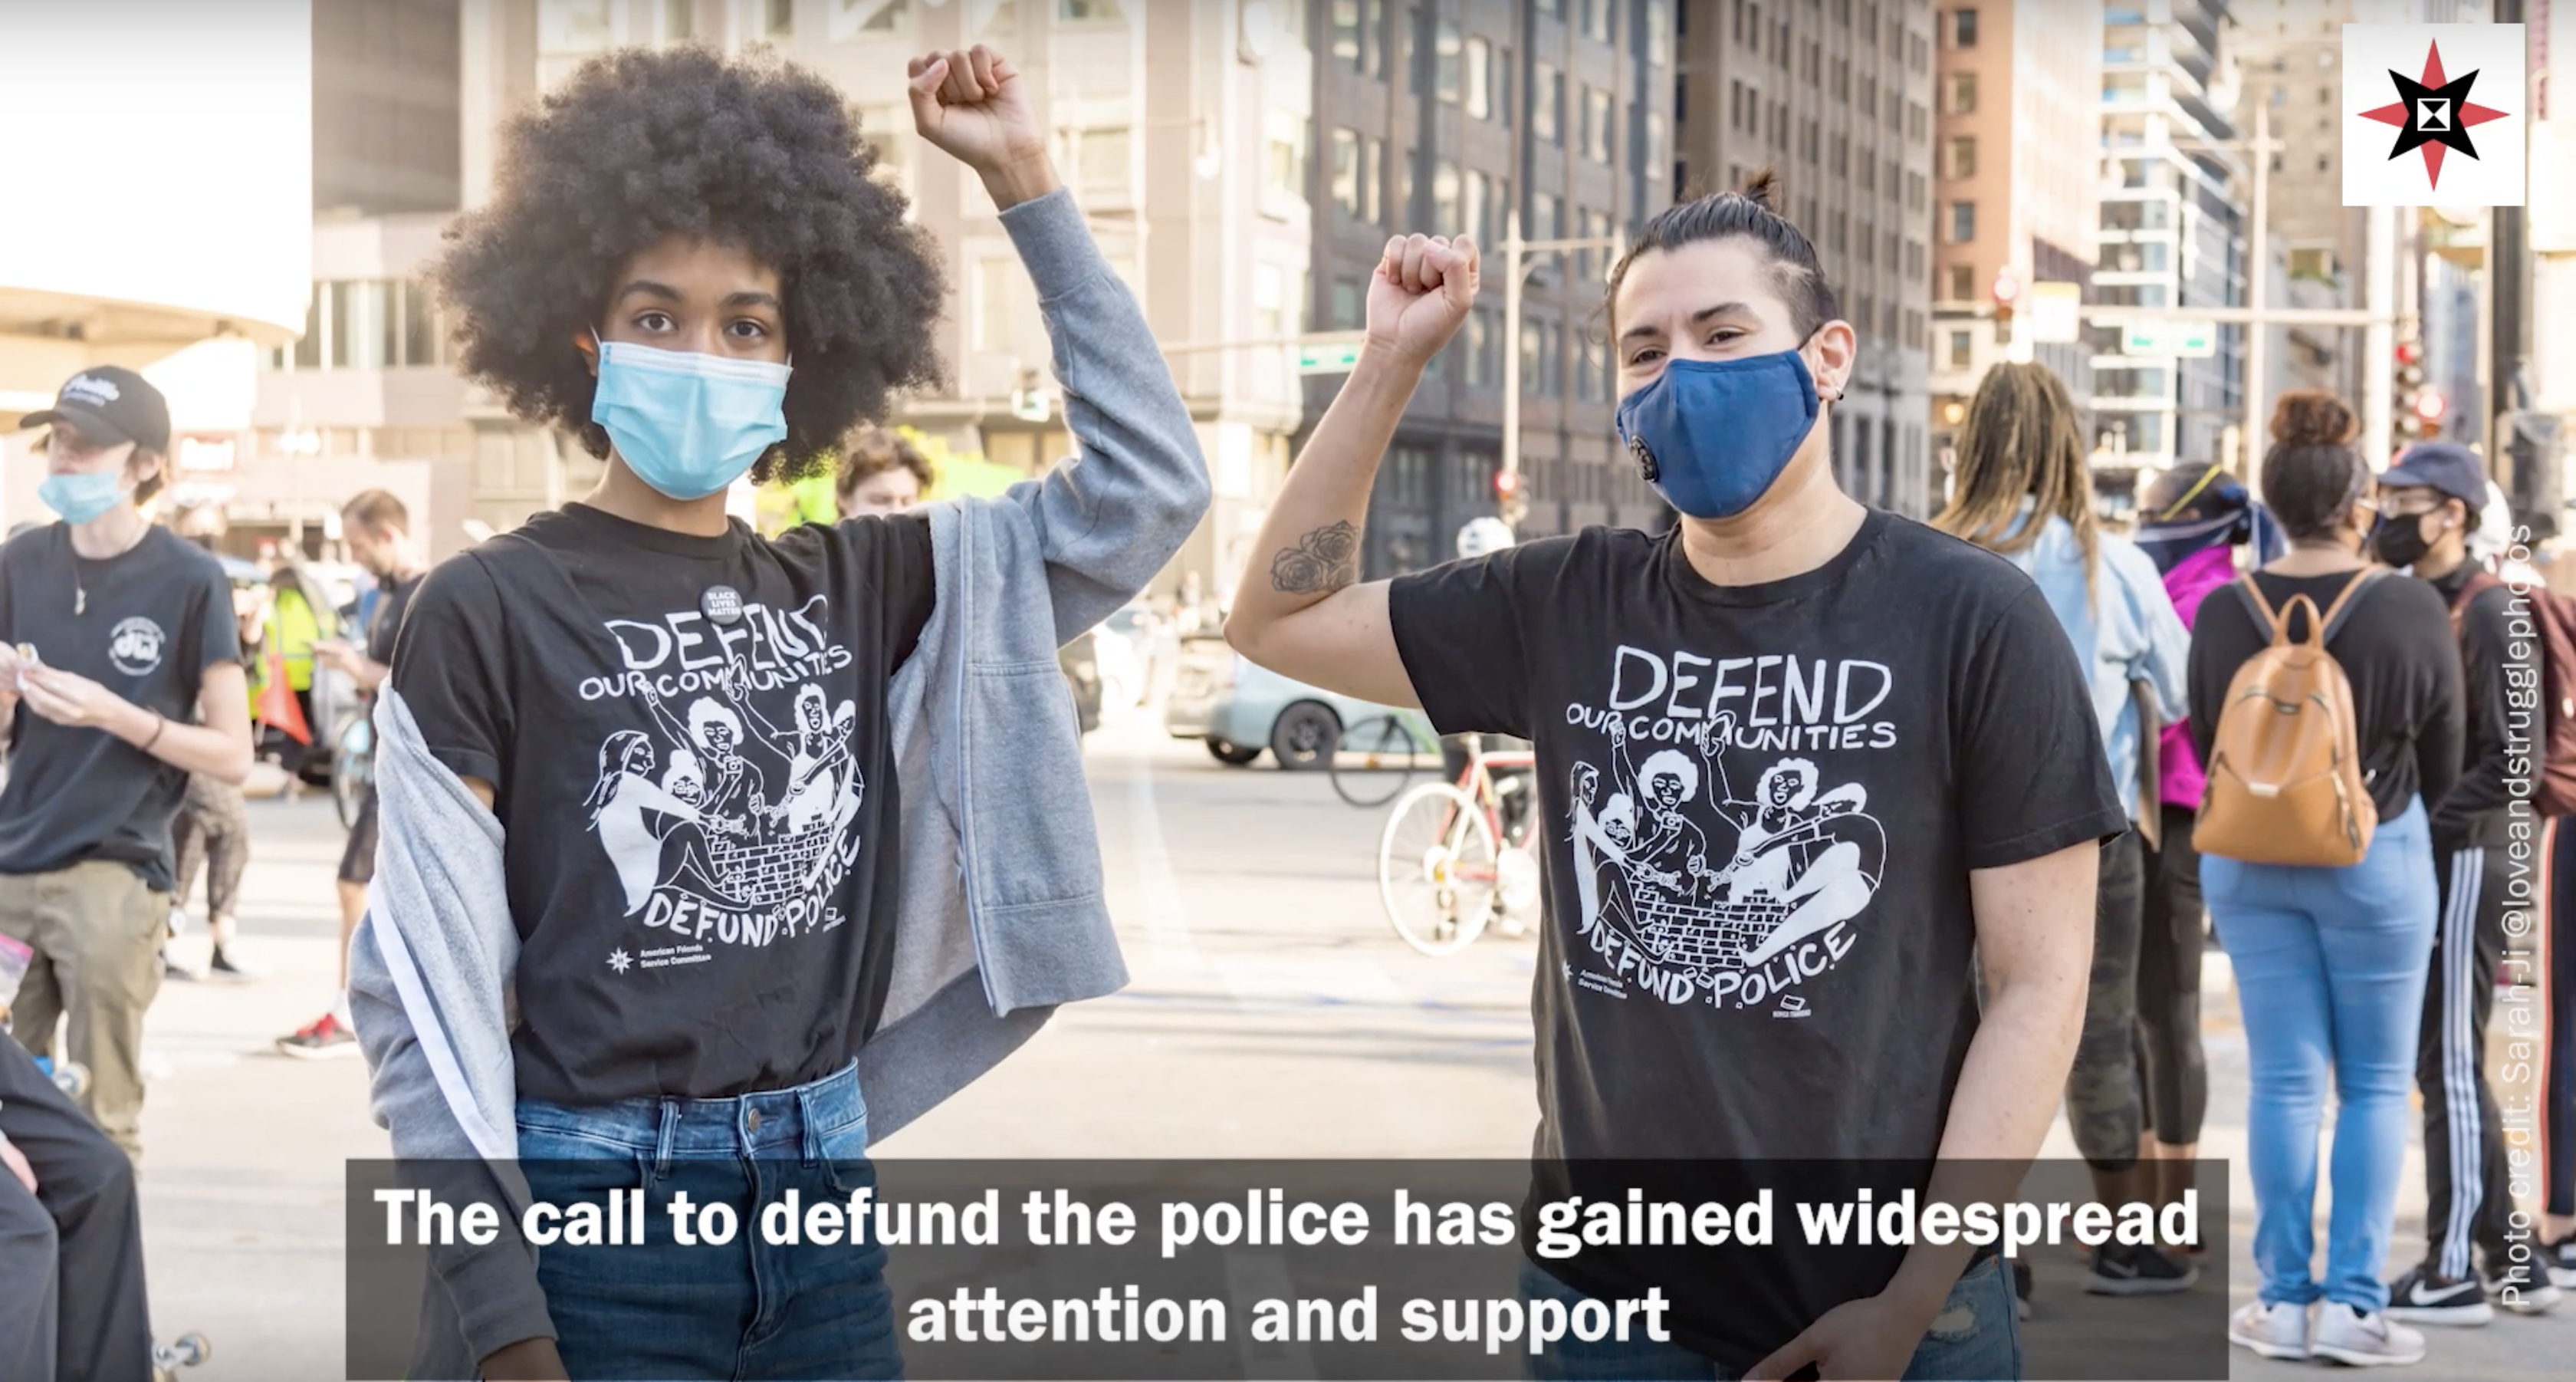 Why defund the police?